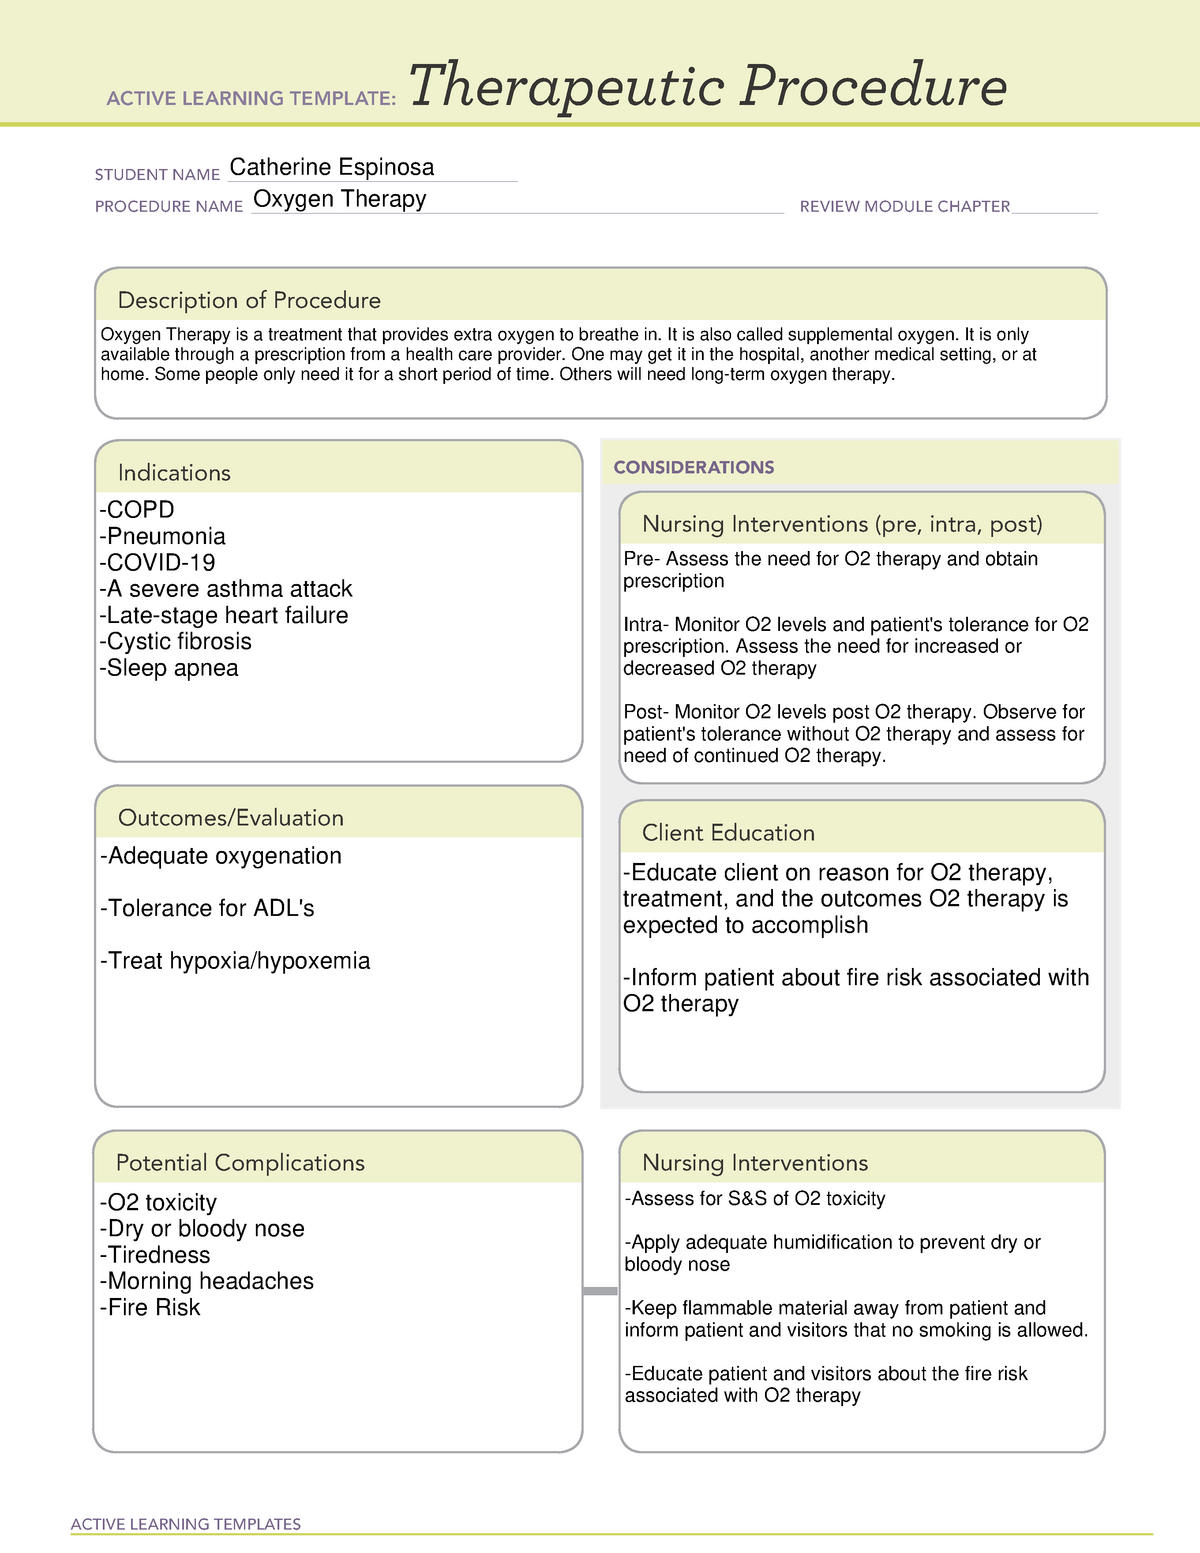 Oxygen Therapy Therapeutic Procedure Active Learning Templates